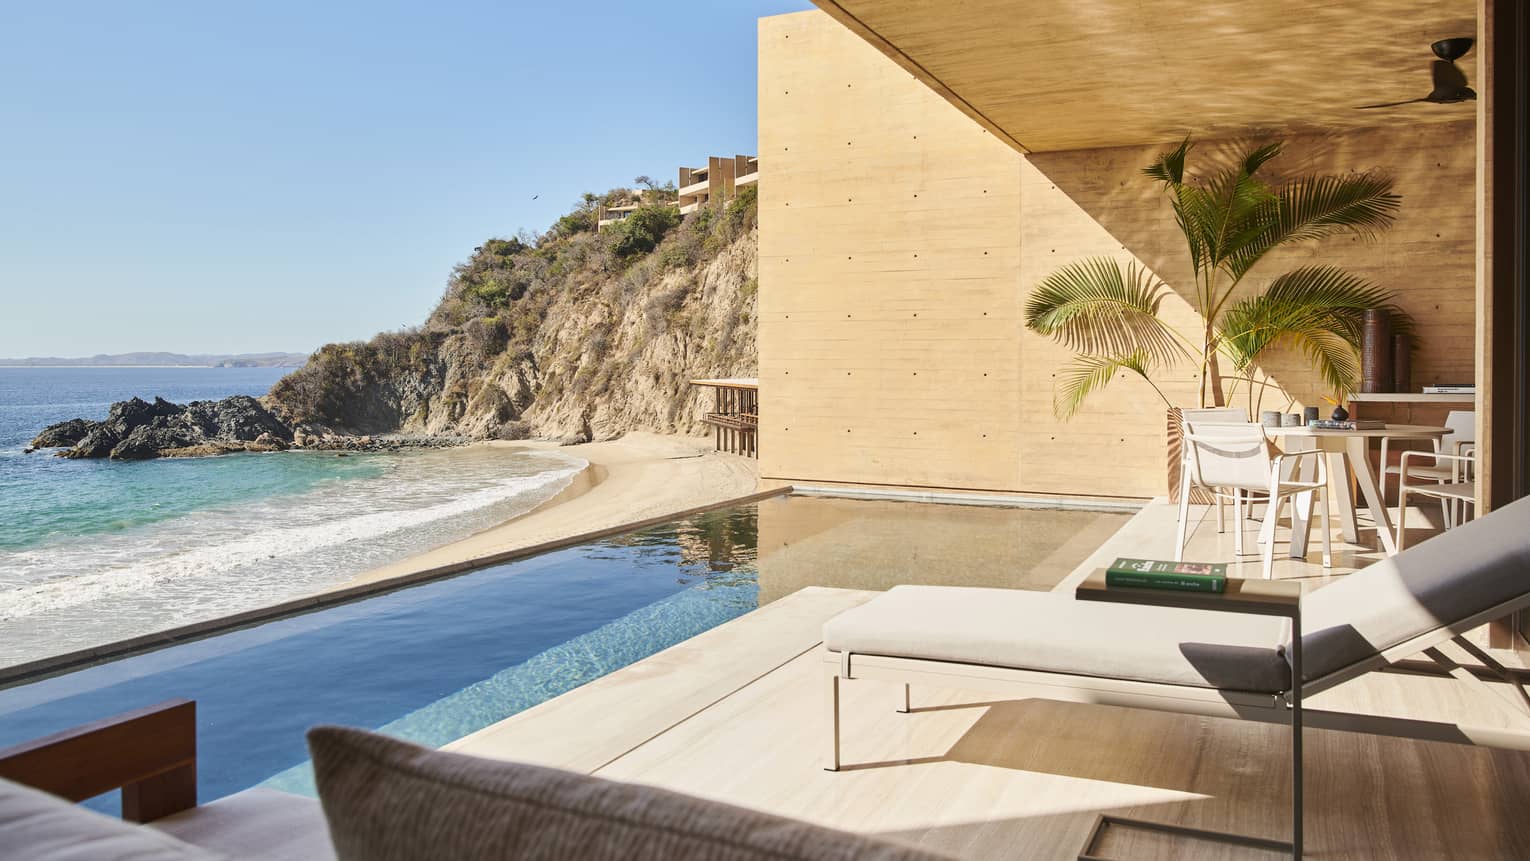 The exterior of a suite with a small pool next to the ocean.